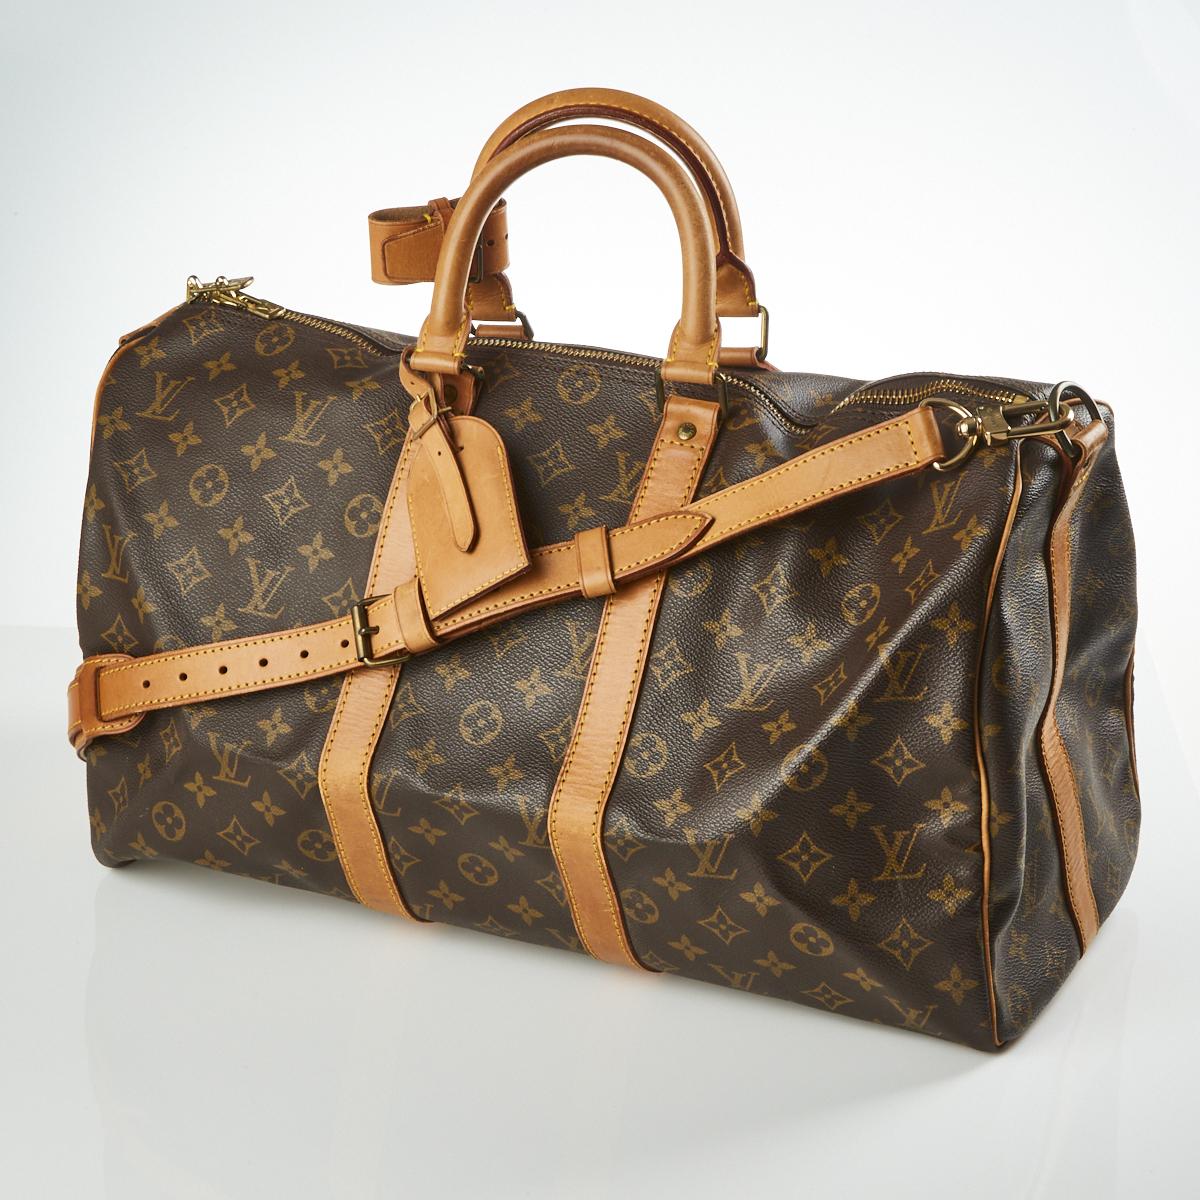 Louis Vuitton Keepall 45 Bags for Sale in Online Auctions